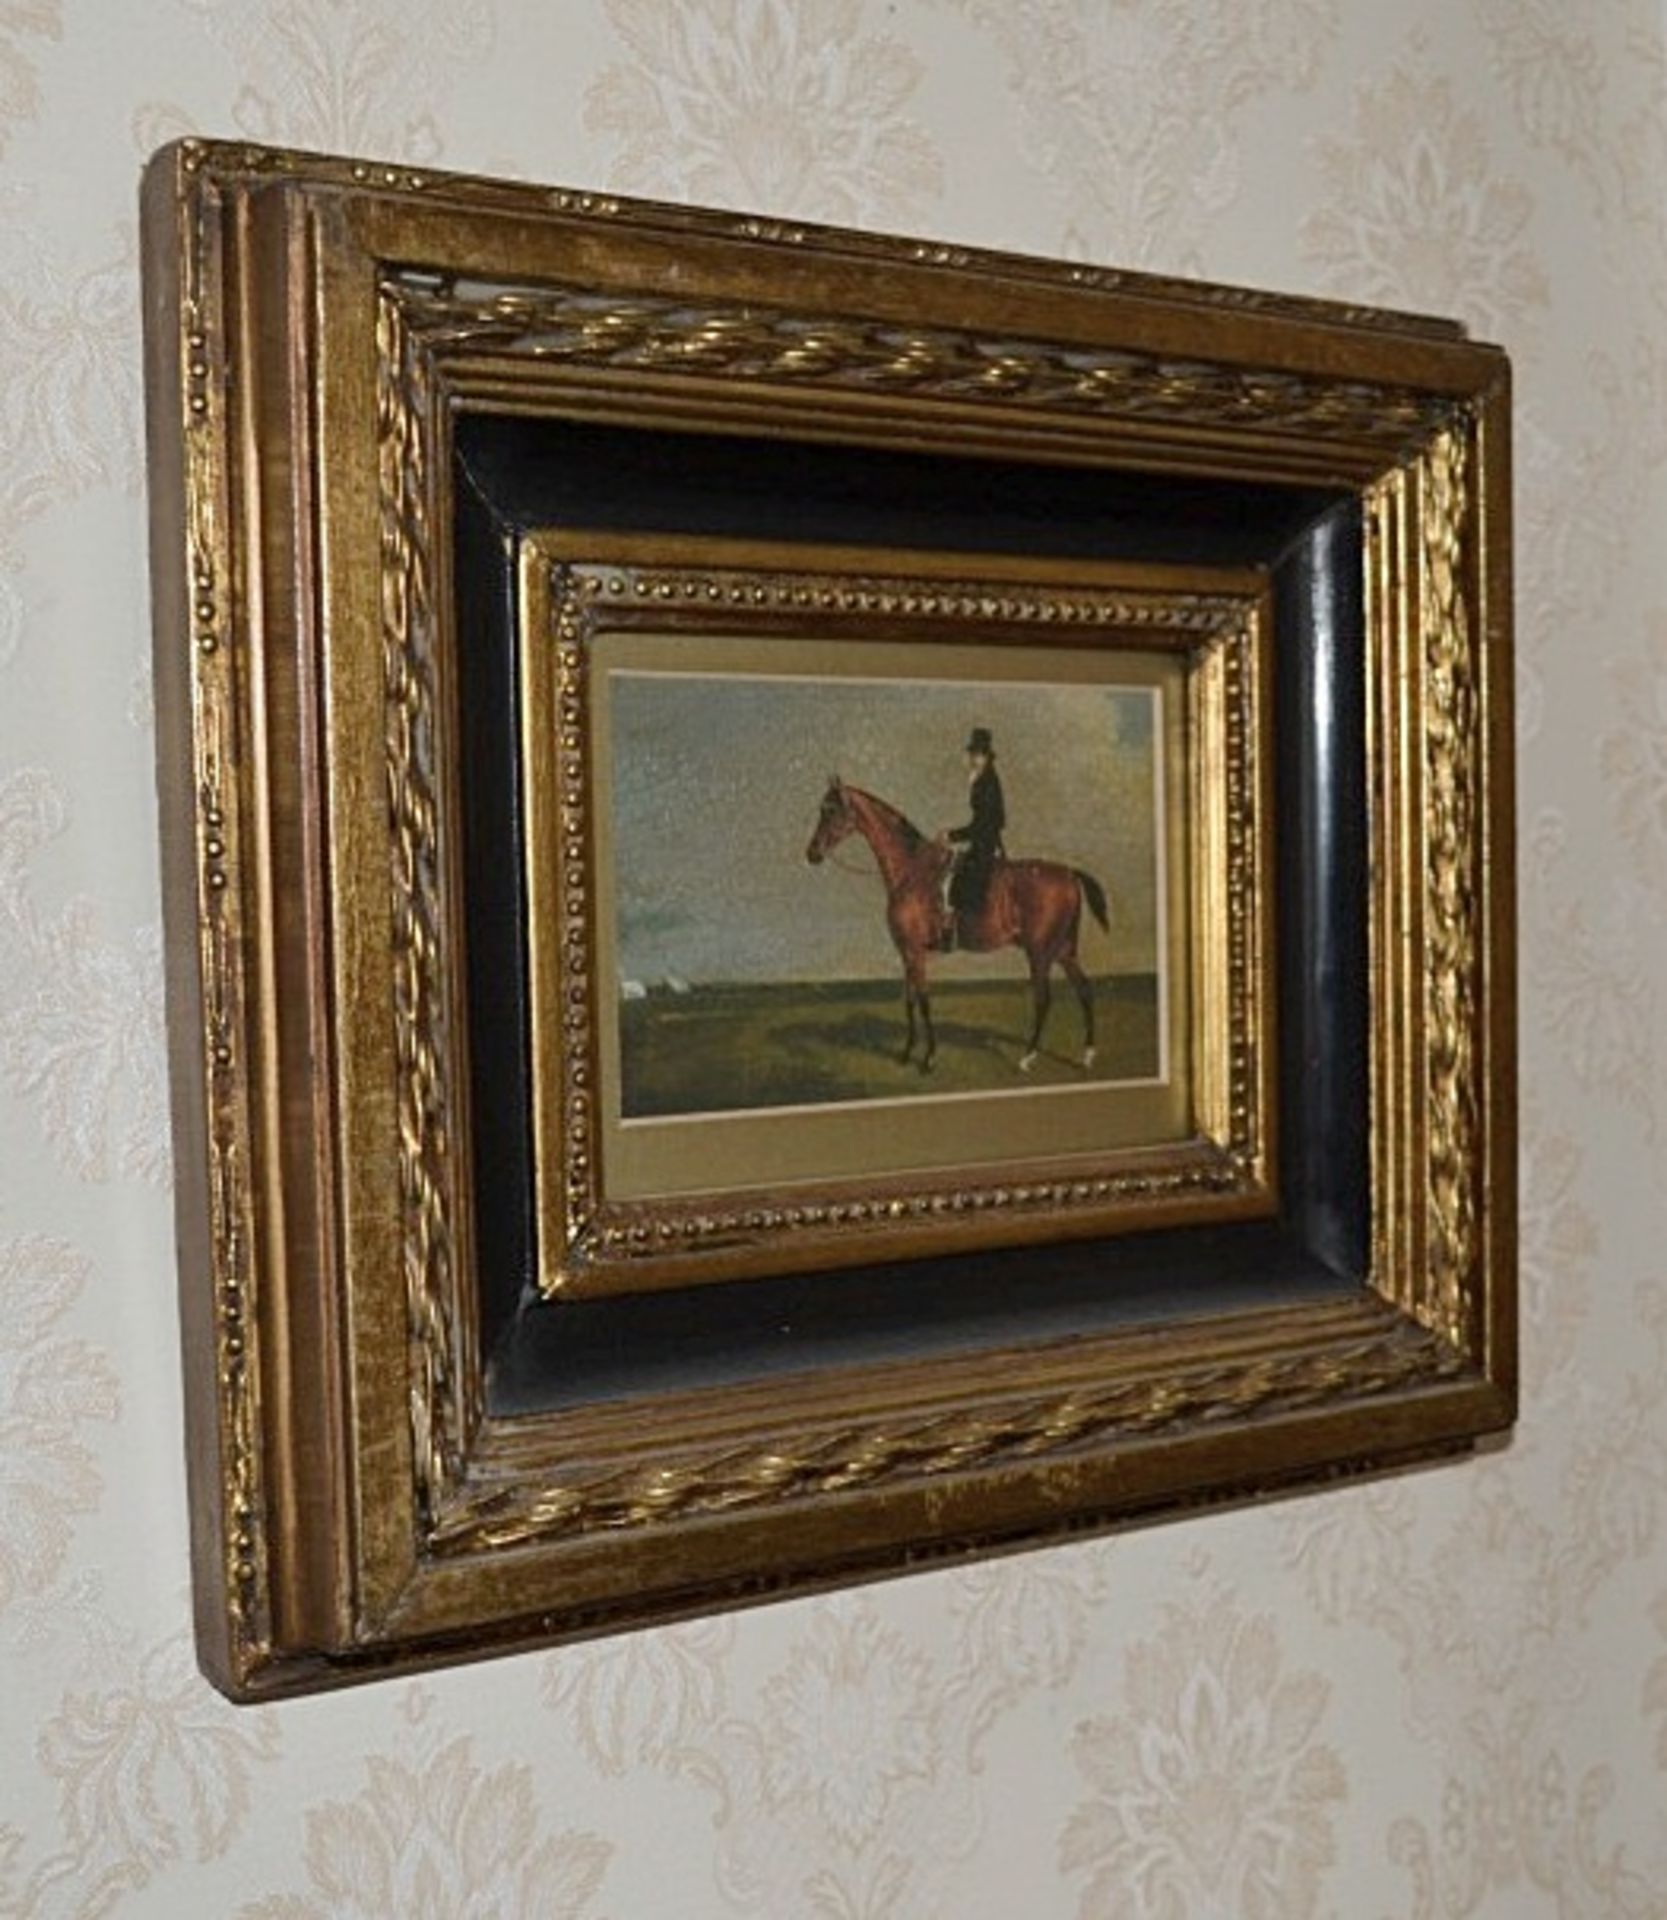 1 x Framed Picture Of Rider On Horseback, Produced By Carvers & Guilders - From A Grade II Listed